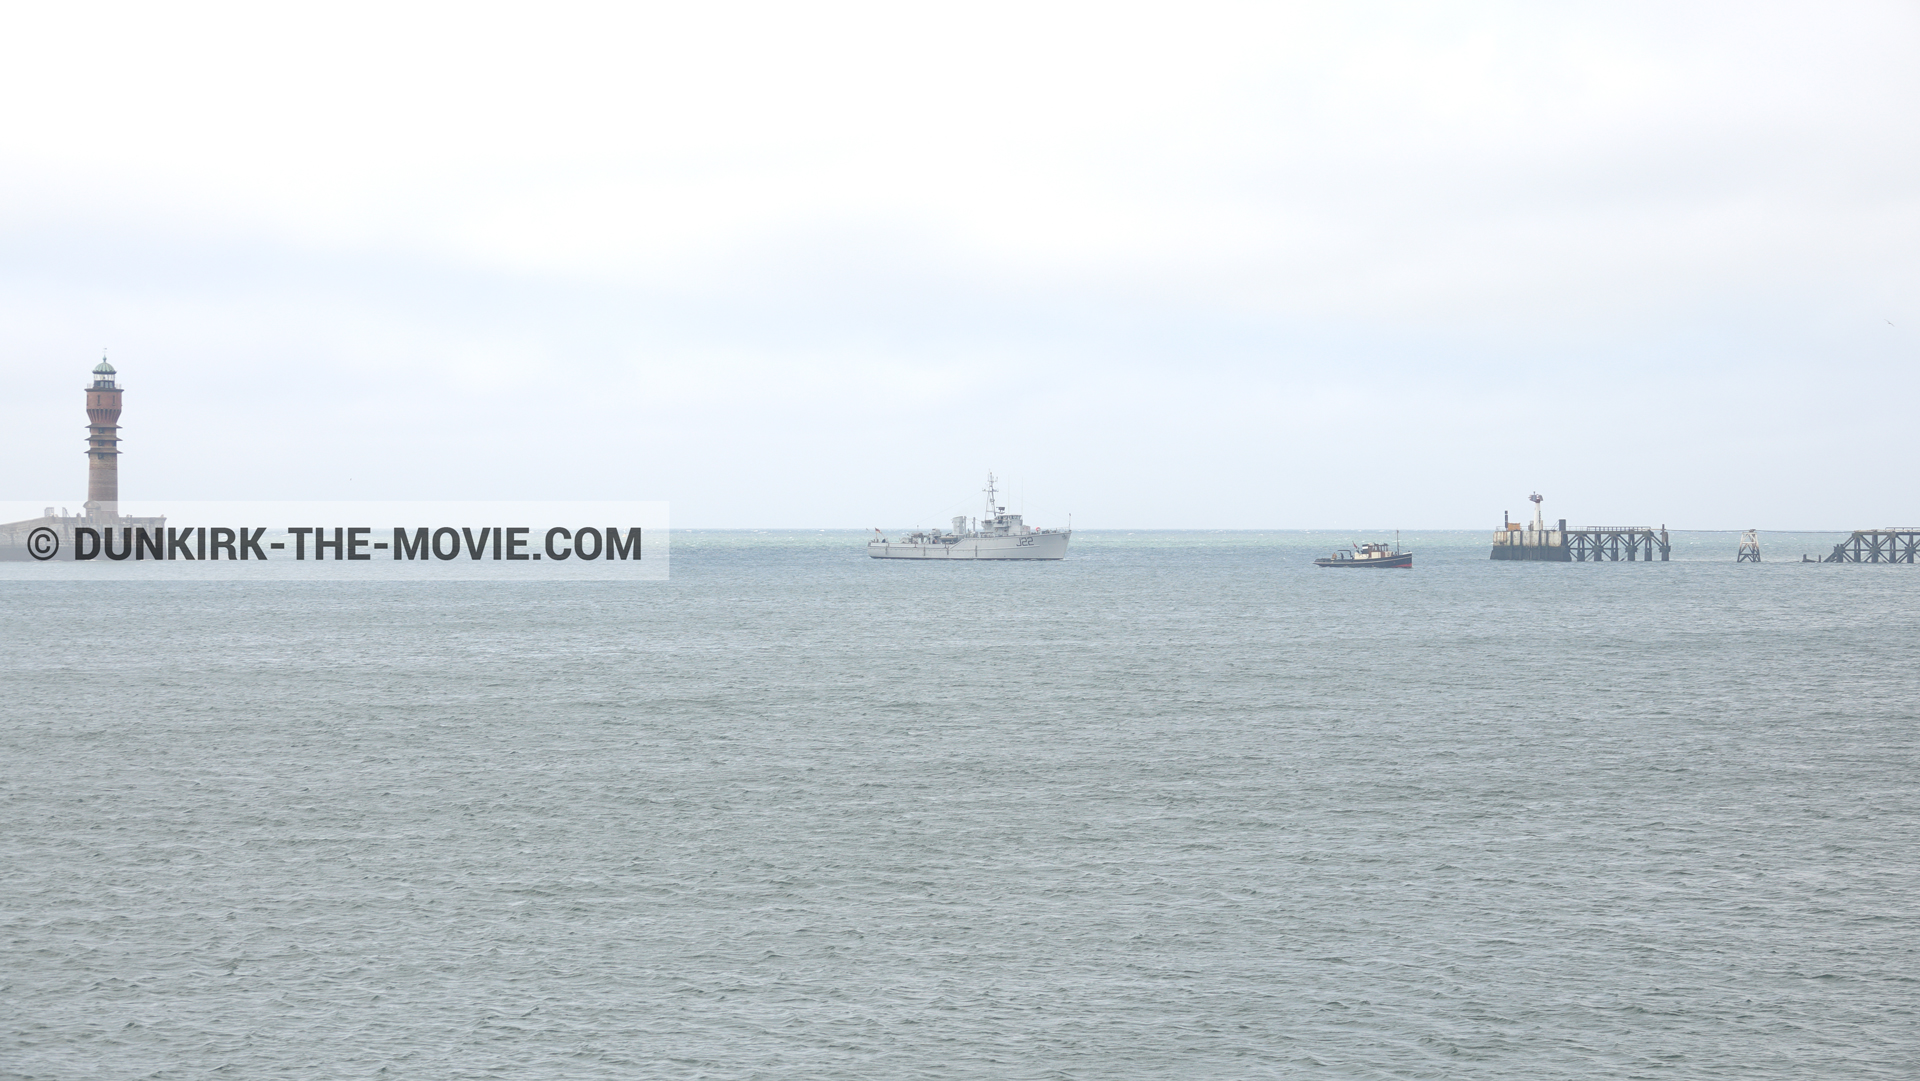 Picture with boat, J22 -Hr.Ms. Naaldwijk, St Pol sur Mer lighthouse,  from behind the scene of the Dunkirk movie by Nolan